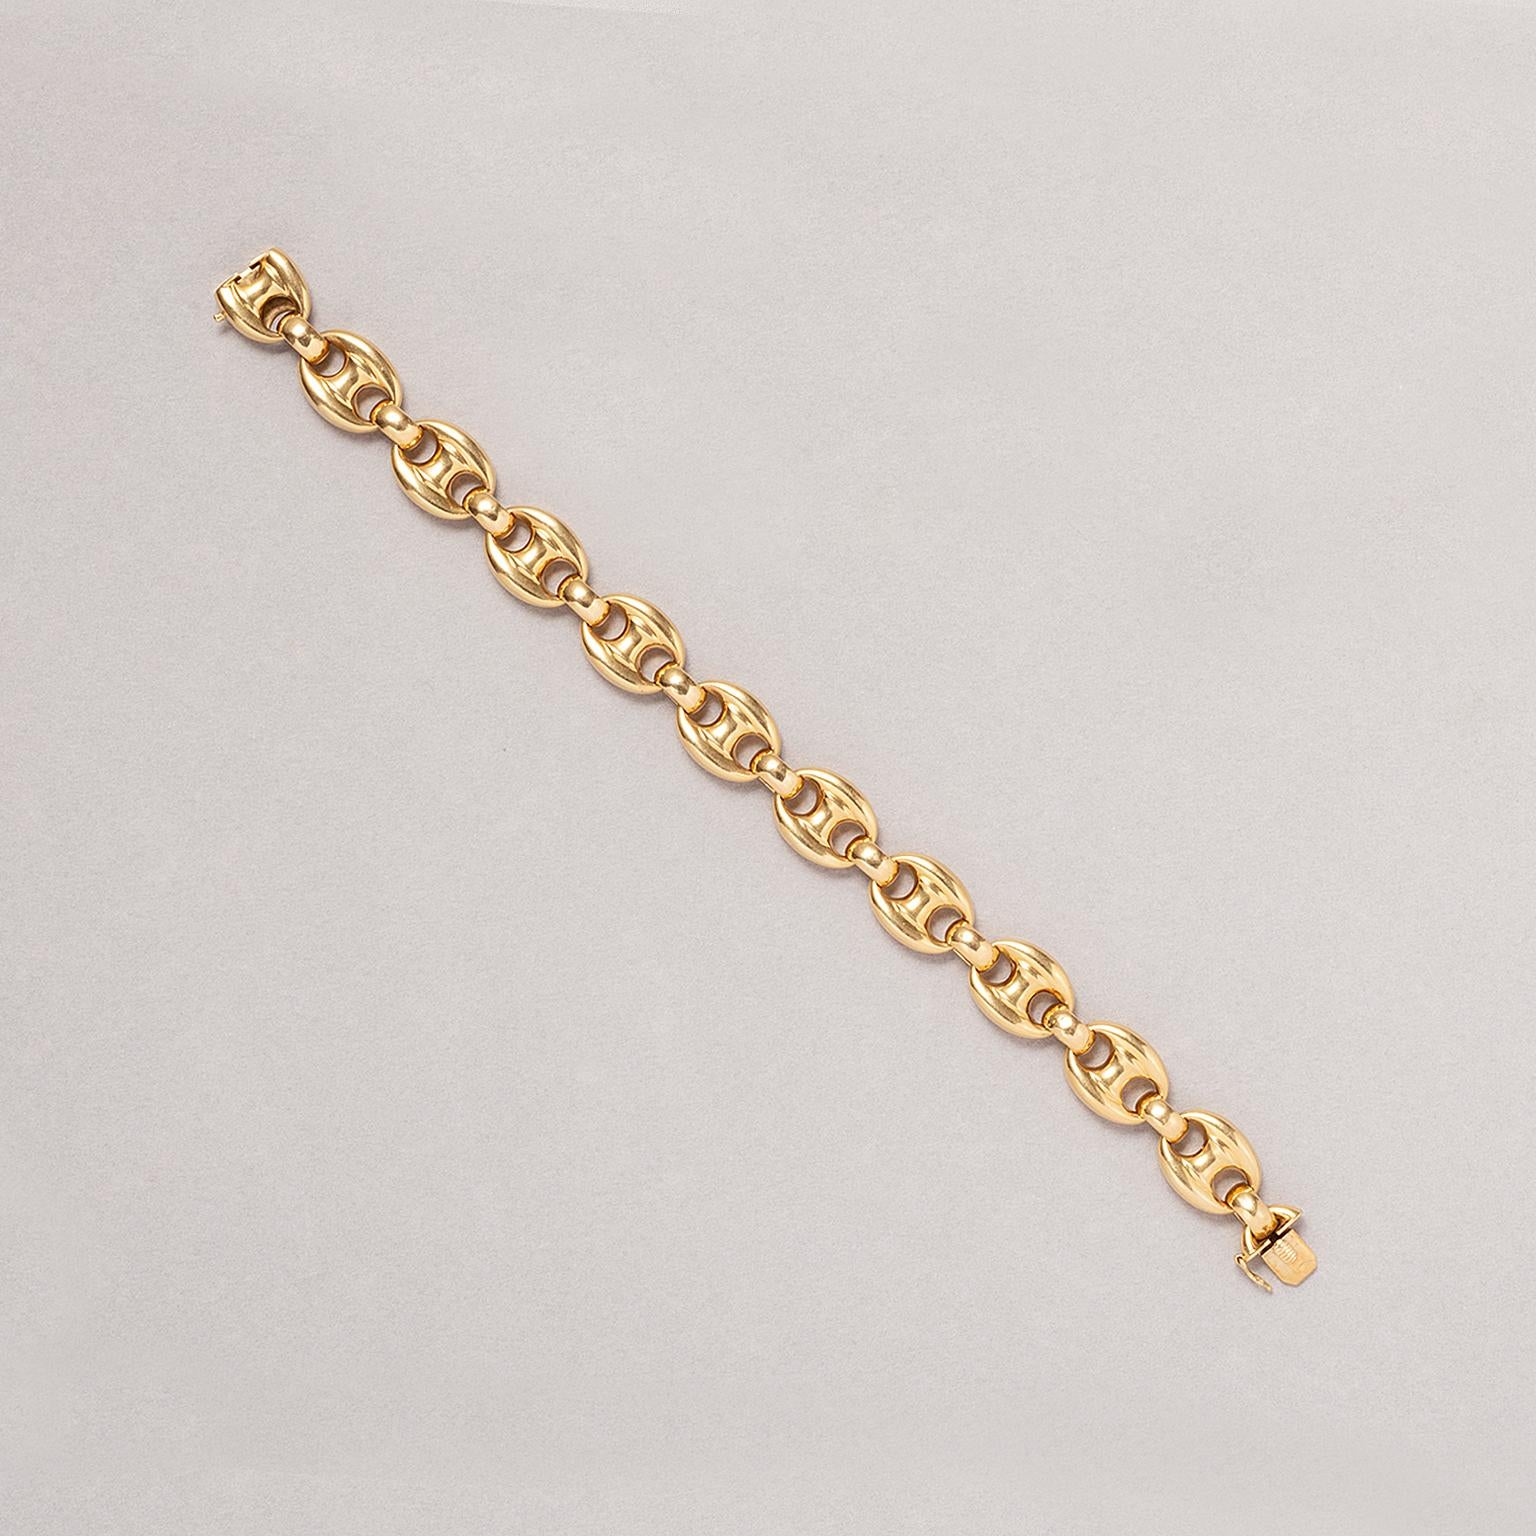 An 18 carat yellow gold mariner bracelet. With master mark: 15 VR for: Weingrill, Italy, circa 1960-70.

weight: 22.16 g
length: 18.8 cm